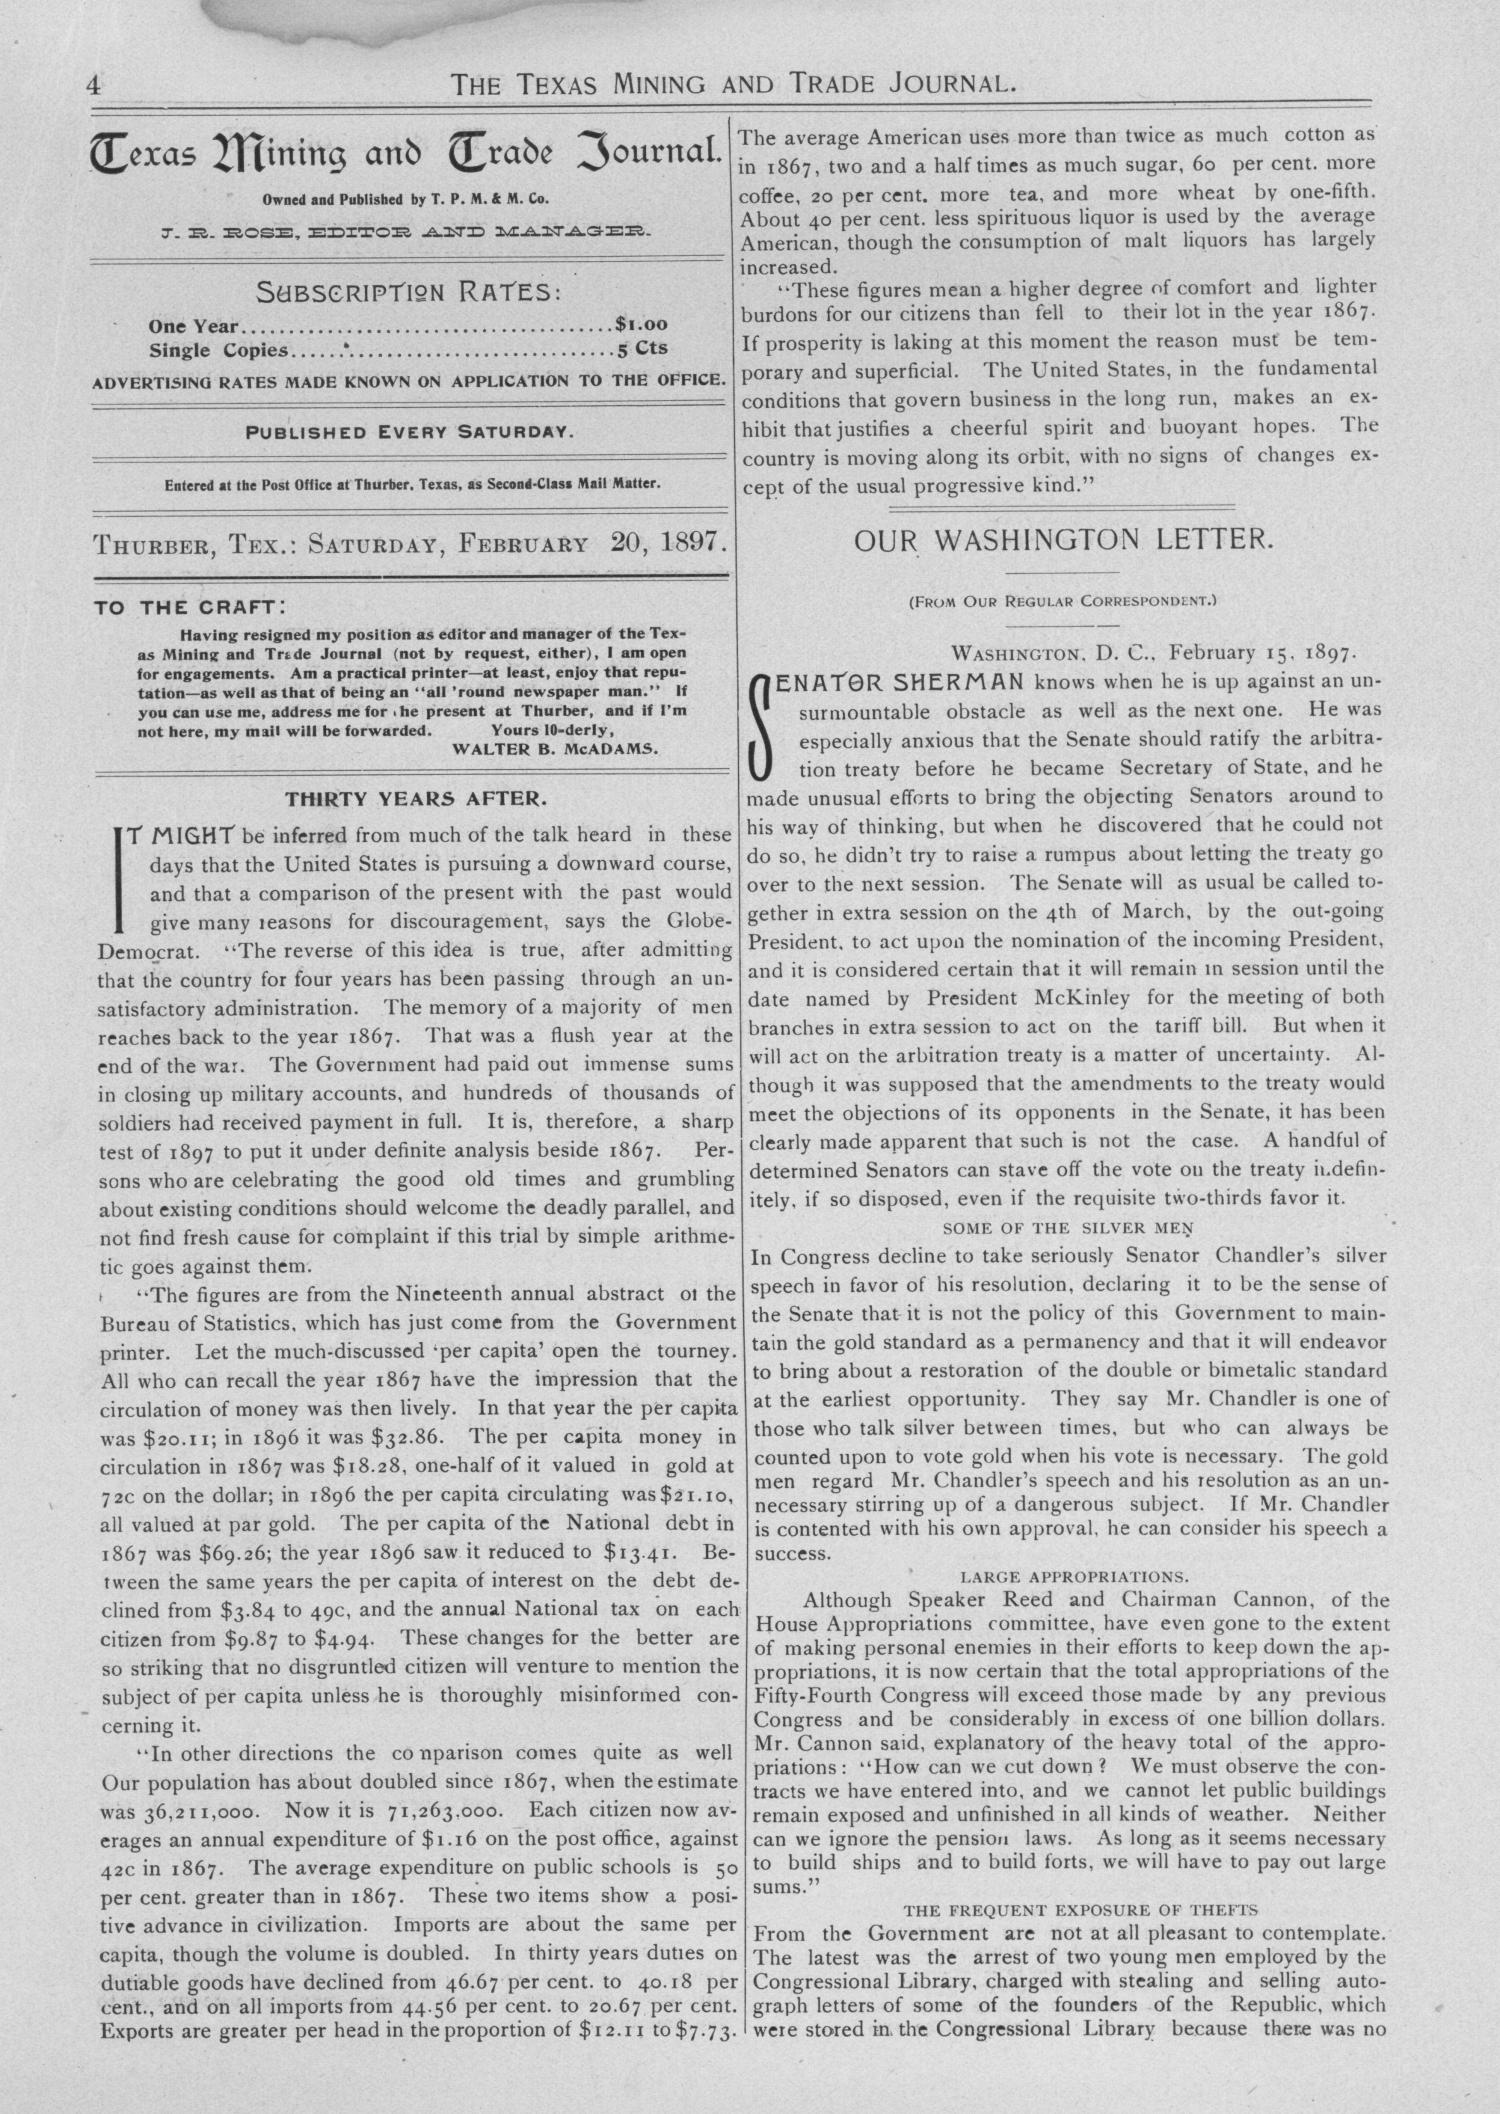 Texas Mining and Trade Journal, Volume 1, Number 31, Saturday, February 20, 1897
                                                
                                                    4
                                                